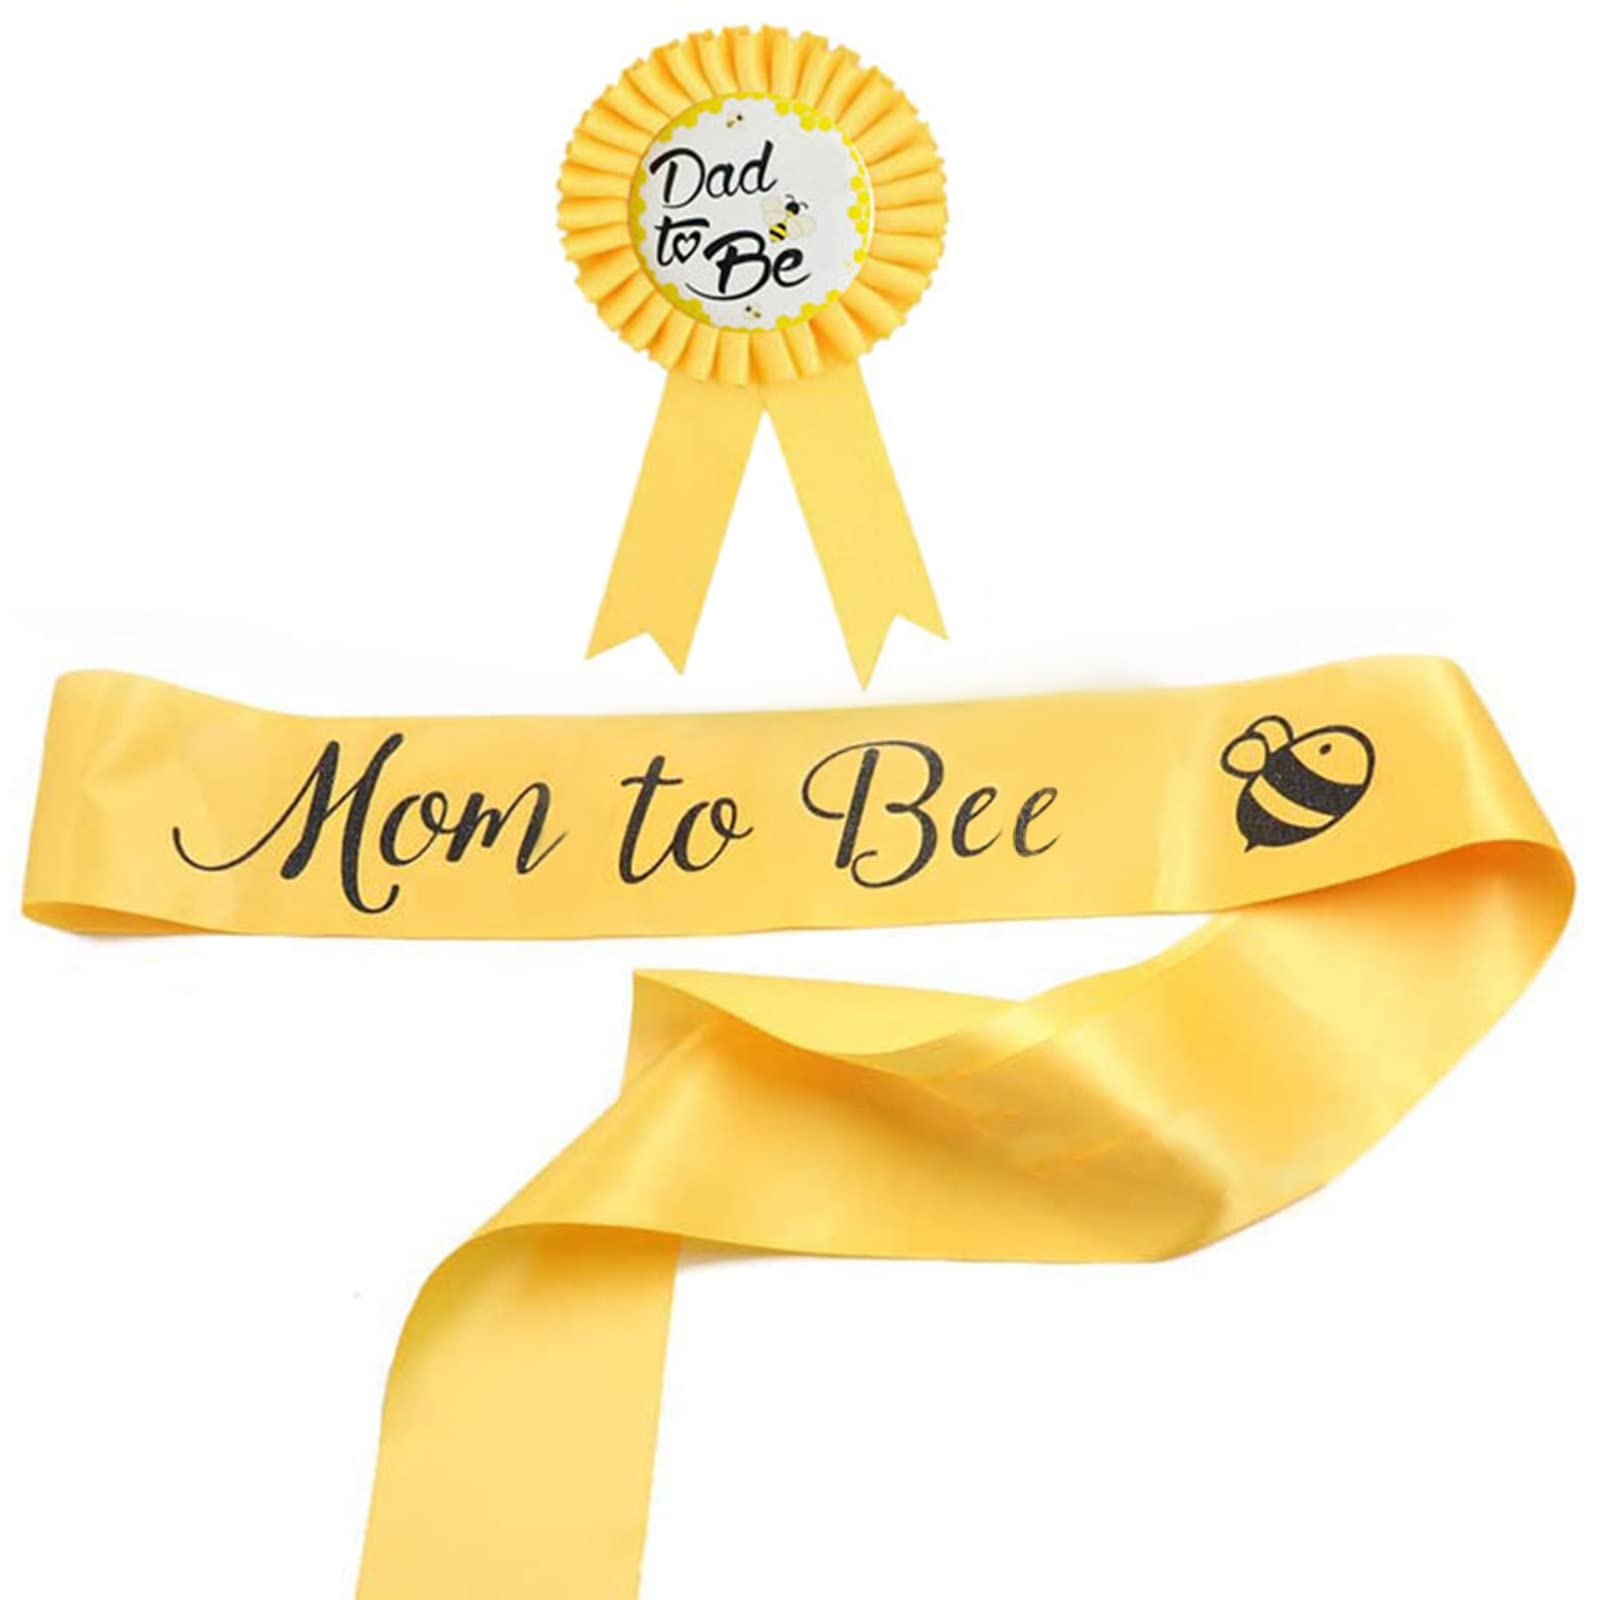 2Packs Baby Shower Decorations Yellow Mom to Bee Sash and Dad to Bee Tinplate Badge with Cute Bee Pattern Baby Welcome Party Gifts